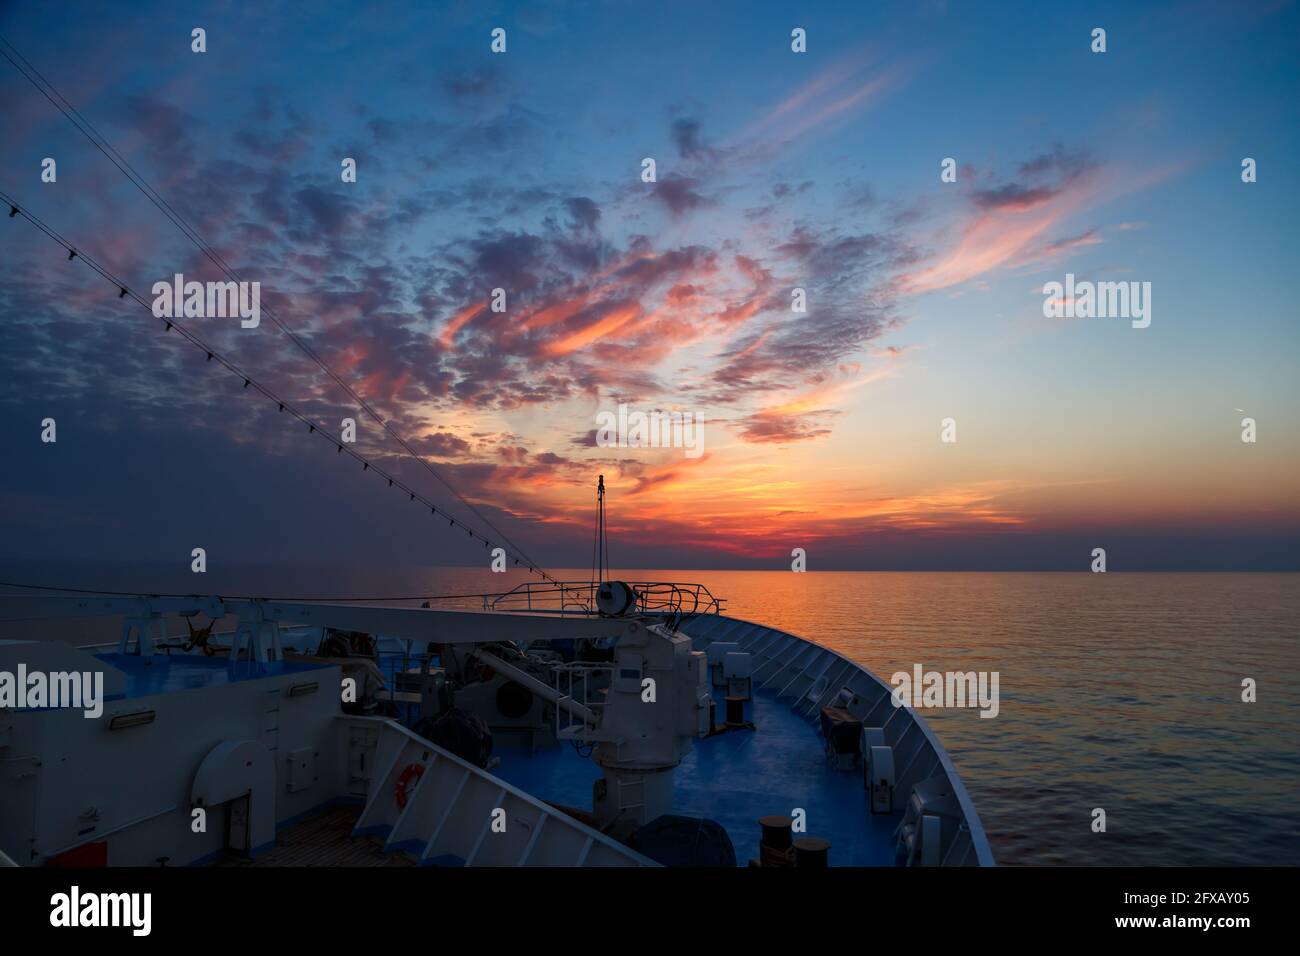 Bow of a passenger cruise ship moving in the open sea towards a stunning pink and orange sunset sky. View from the top. Stock Photo